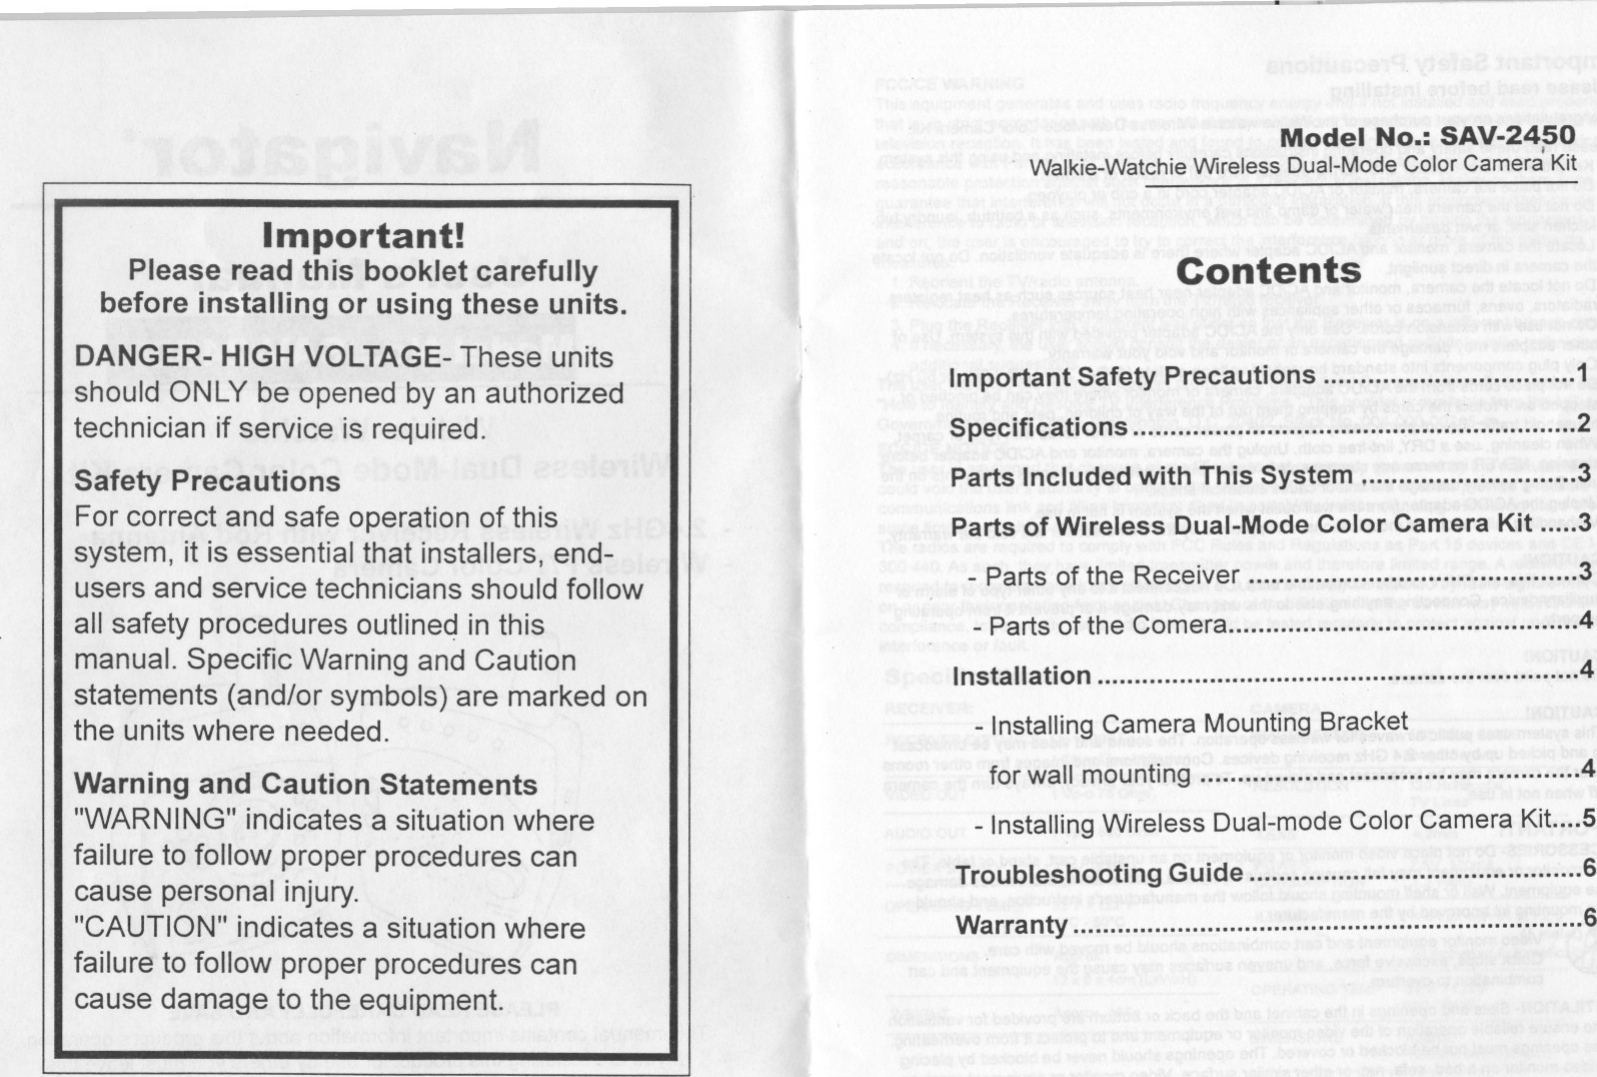 -= ----IModel No.: SAV-2450,Walkie-Watchie Wireless Dual-Mode Color Camera KitImportant!Please read this booklet carefullybefore installing or using these units.DANGER- HIGH VOLTAGE- These unitsshould ONLY be opened by an authorizedtechnician if service is required.ContentsSafety PrecautionsFor correct and safe operation of thissystem, it is essential that installers, end-users and service technicians should followall safety procedures outlineq in thismanual. Specific Warning and Cautionstatements (and/or symbols) are marked onthe units where needed.Warning and Caution Statements&quot;WARNING&quot; indicates a situation wherefailure to follow proper procedures cancause personal injury.&quot;CAUTION&quot; indicates a situation wherefailure to follow proper procedures cancause damage to the equipment.Important Safety Precautions 1Specifications ... : 2Parts Included with This System , 3Parts of Wireless Dual-Mode Color Camera Kit 3- Parts of the Receiver 3- Parts ofthe Comera 4Installation ... 4-Installing Camera Mounting Bracketfor wall mounting 4-Installing Wireless Dual-mode Color Camera Kit STroubleshooting Guide 6Warranty 6